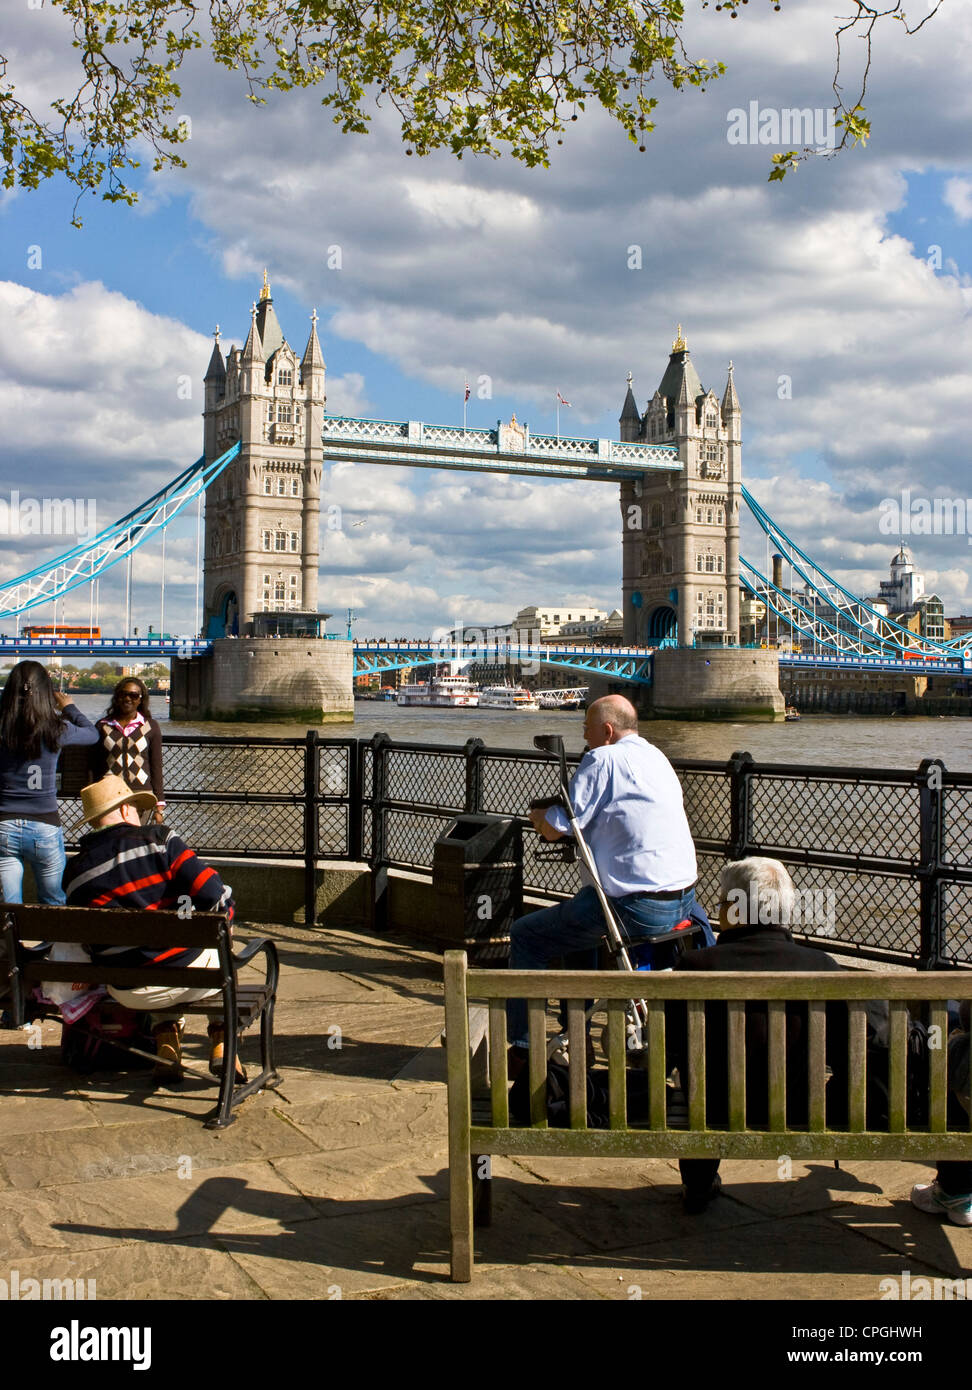 Tourists holidaymakers relaxing near grade 1 listed Tower Bridge London England Europe Stock Photo